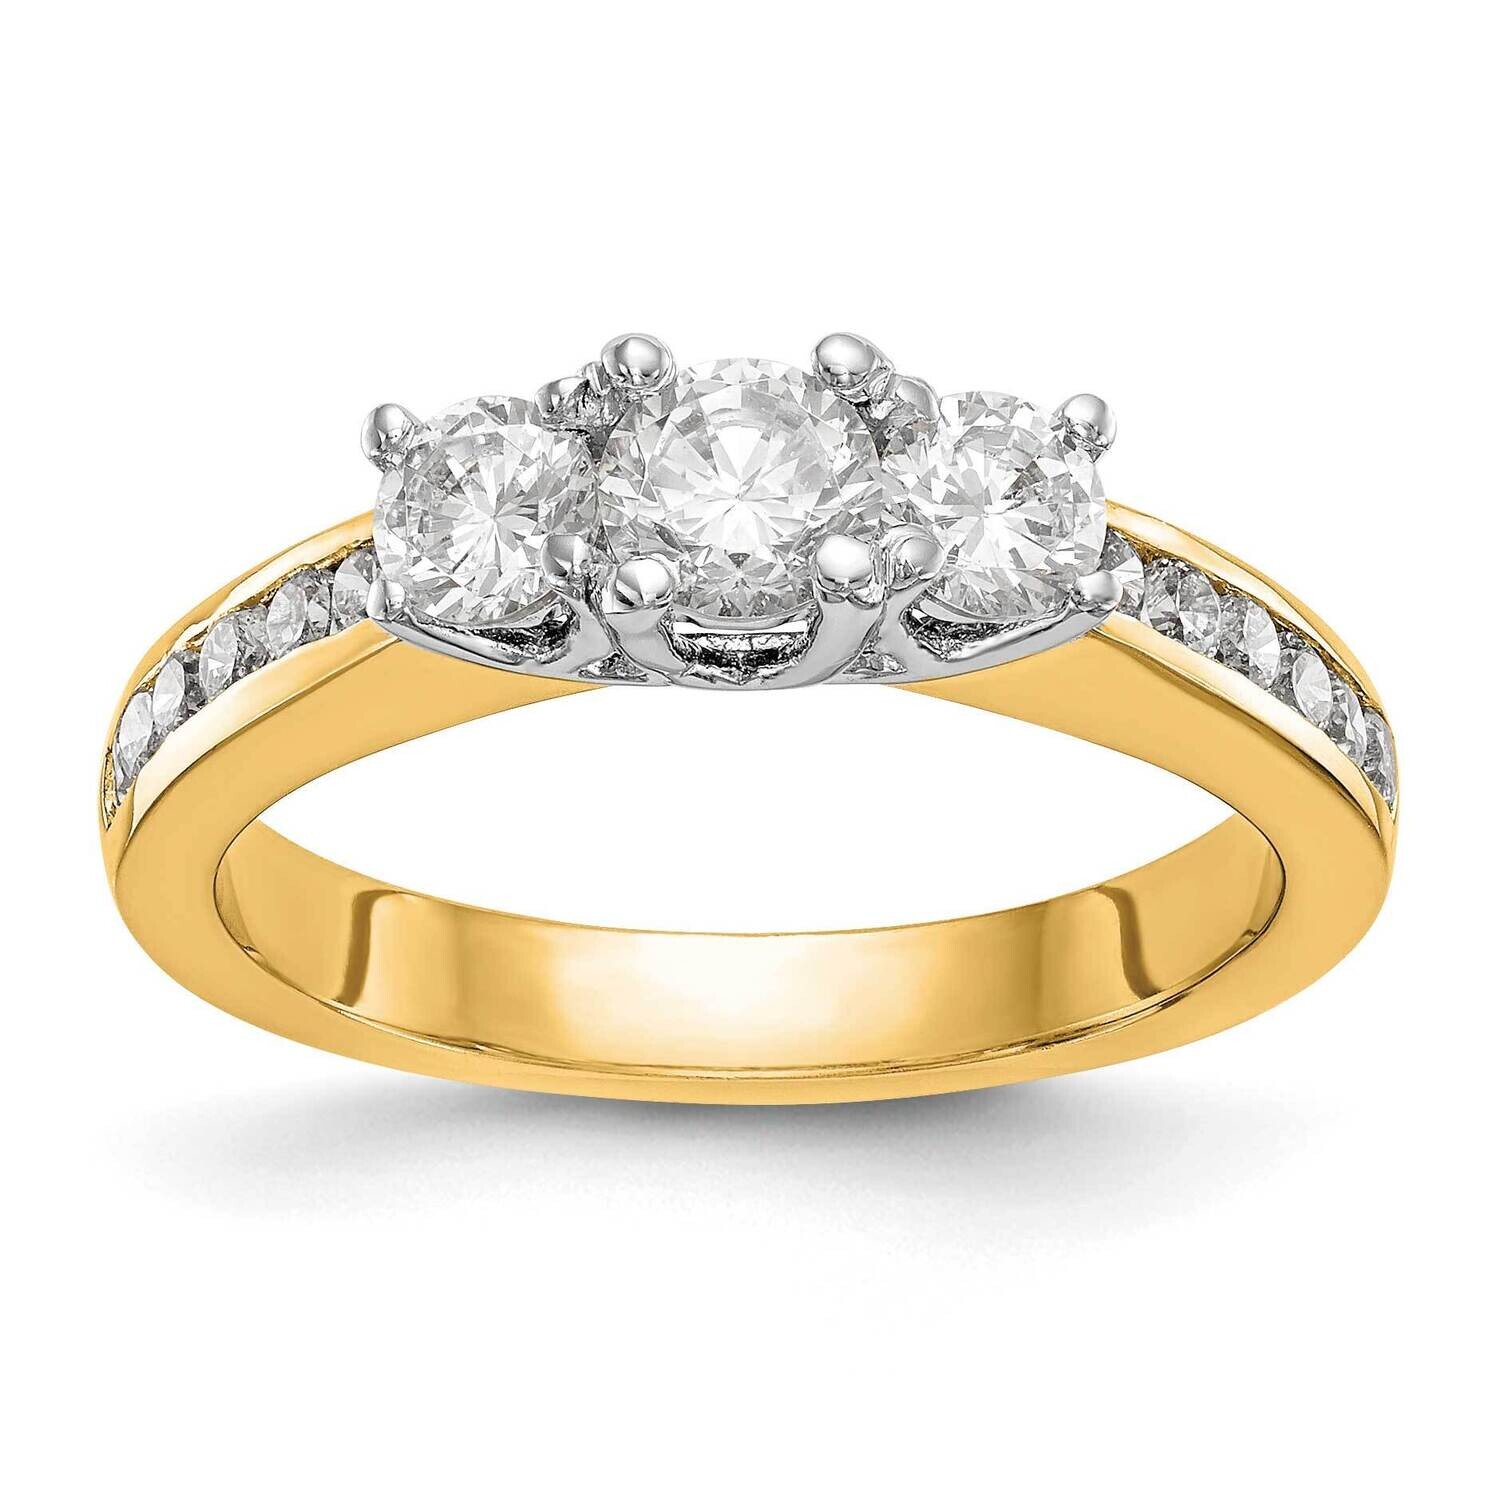 3-Stone Plus Holds 3/4 Carat 5.8mm Round Center 2-4.8mm Round Sides Diamond Semi-Mount Engagement Ring 14k Two-Tone Gold RM2979E-075-YWAA